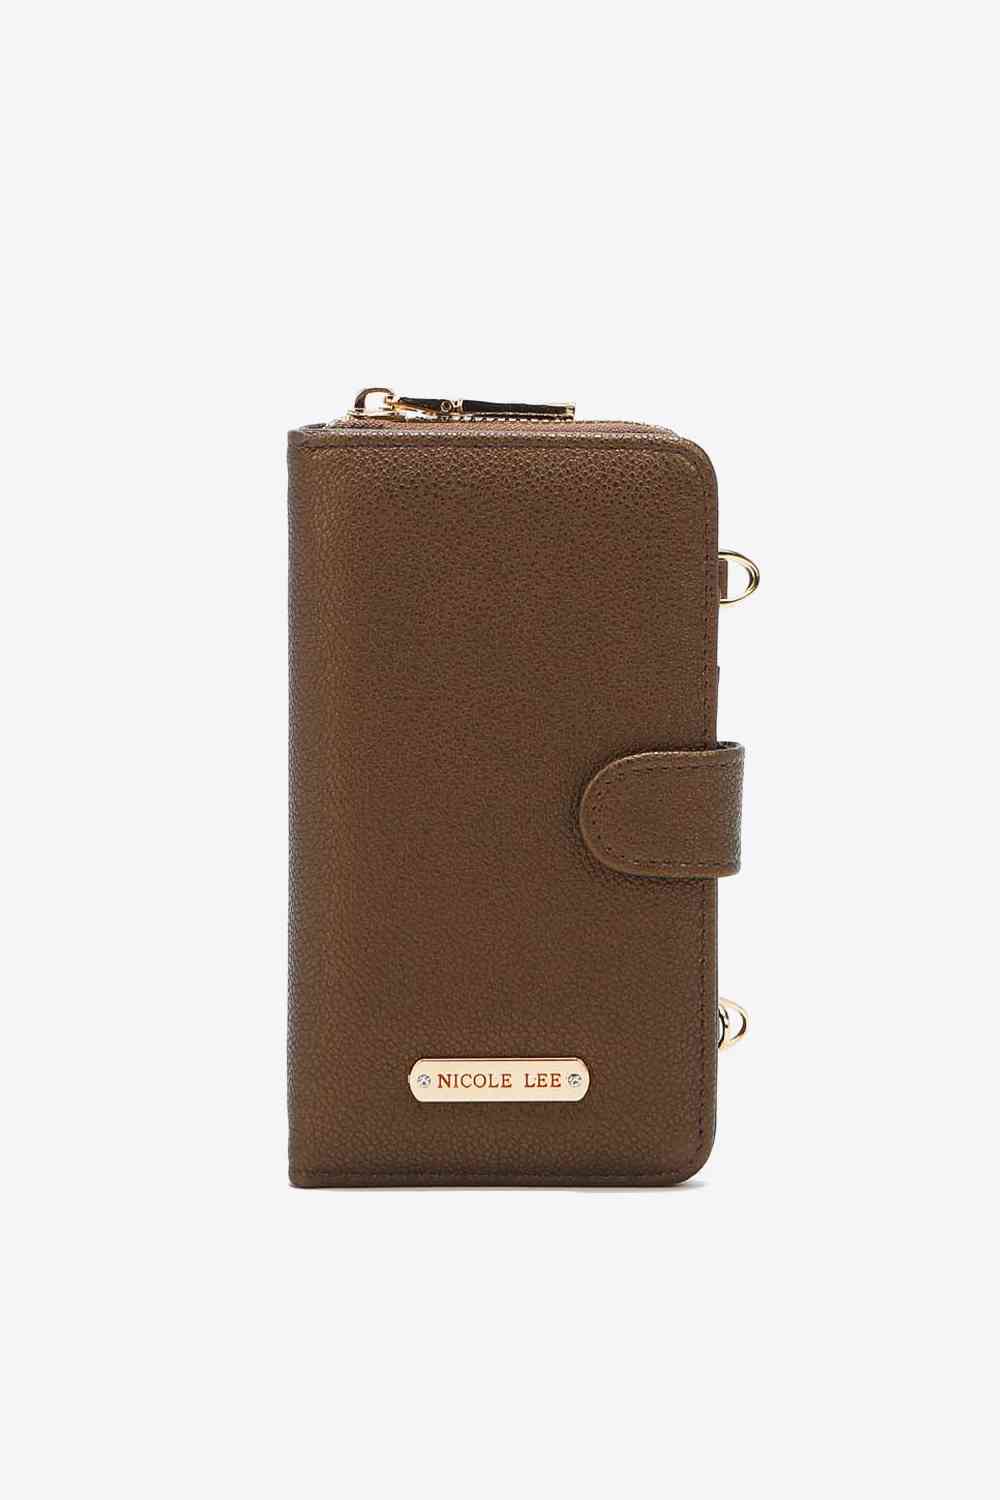 Nicole Lee USA Two-Piece Crossbody Phone Case Wallet - Three Bears Boutique